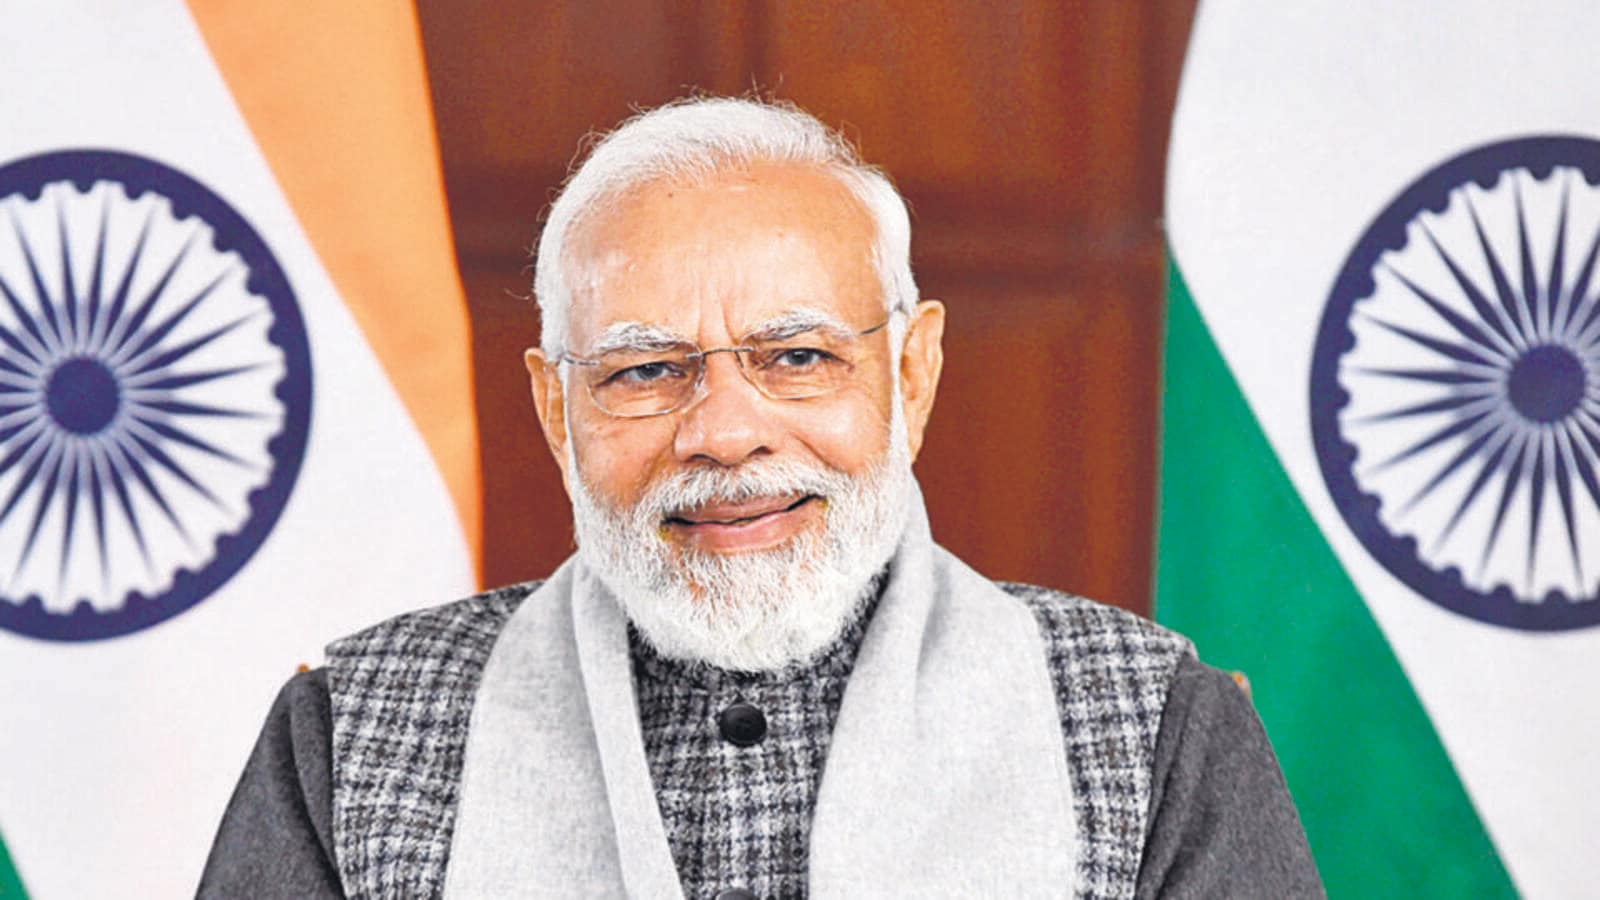 On Modi's 68th birthday, painters from 6 states draw PM's welfare schemes  on canvas | Meerut News - Times of India